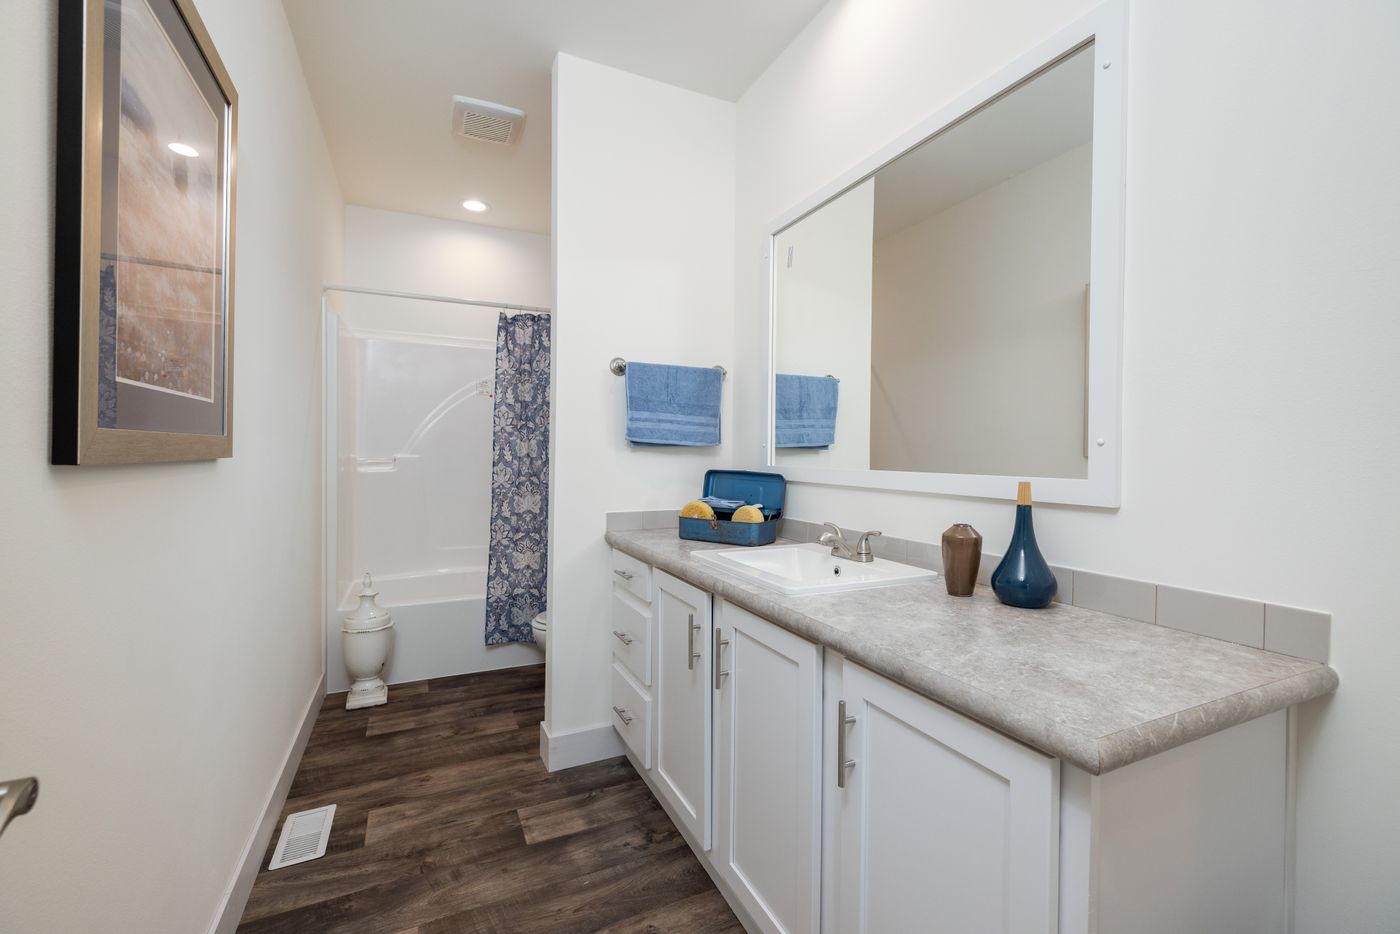 The 50TH ANNIVERSARY Guest Bathroom. This Manufactured Mobile Home features 3 bedrooms and 2 baths.